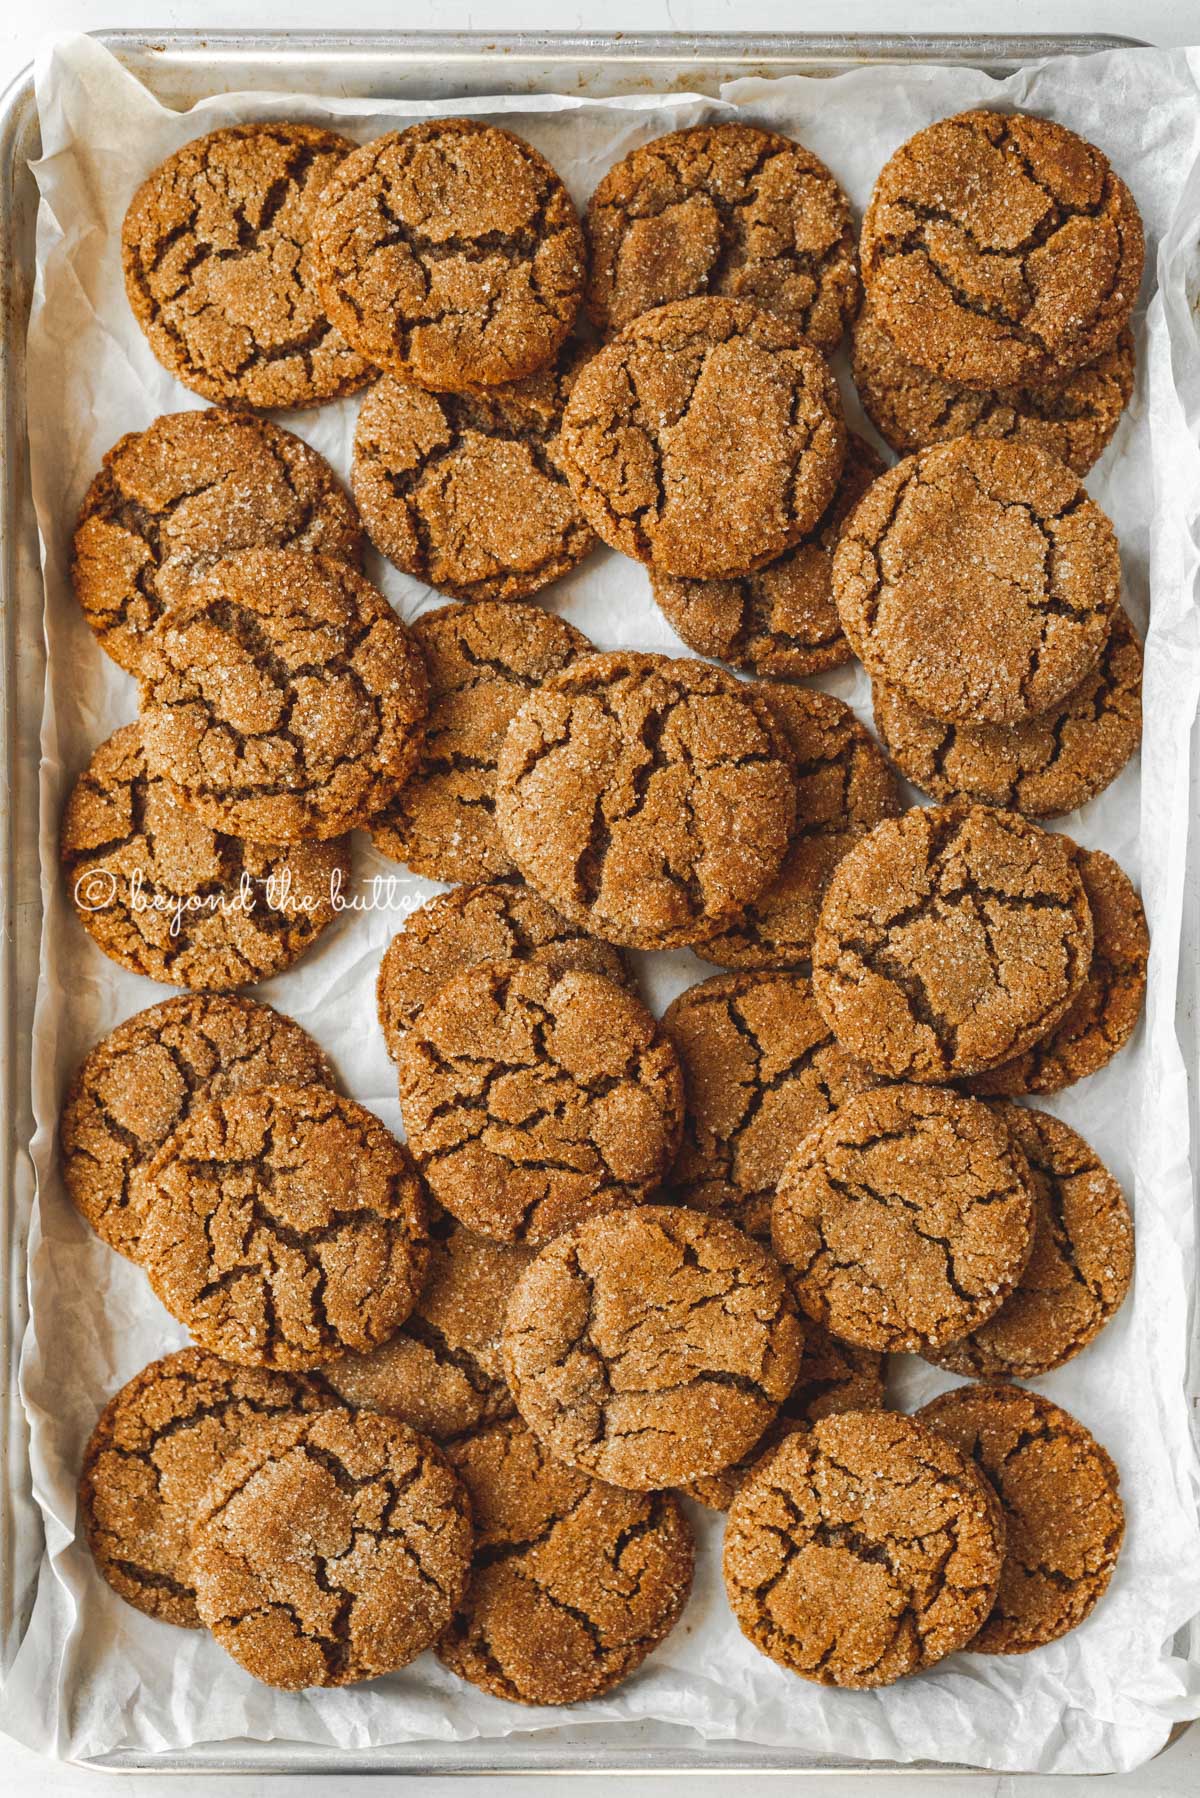 Parchment lined baking sheet topped with super soft molasses cookies | All Images © Beyond the Butter™